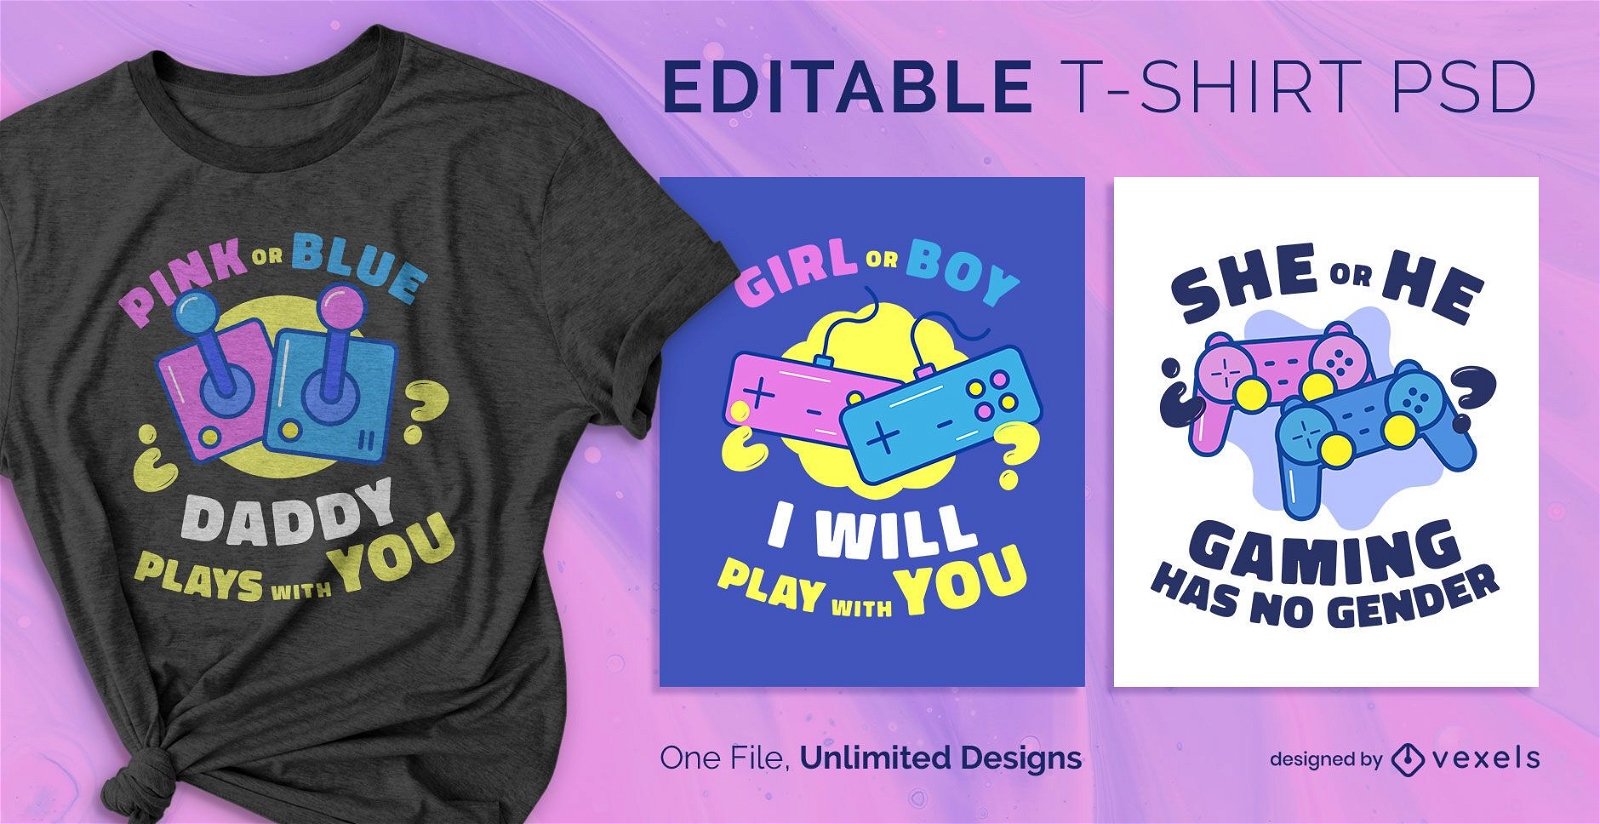 Gaming gender scalable t-shirt psd